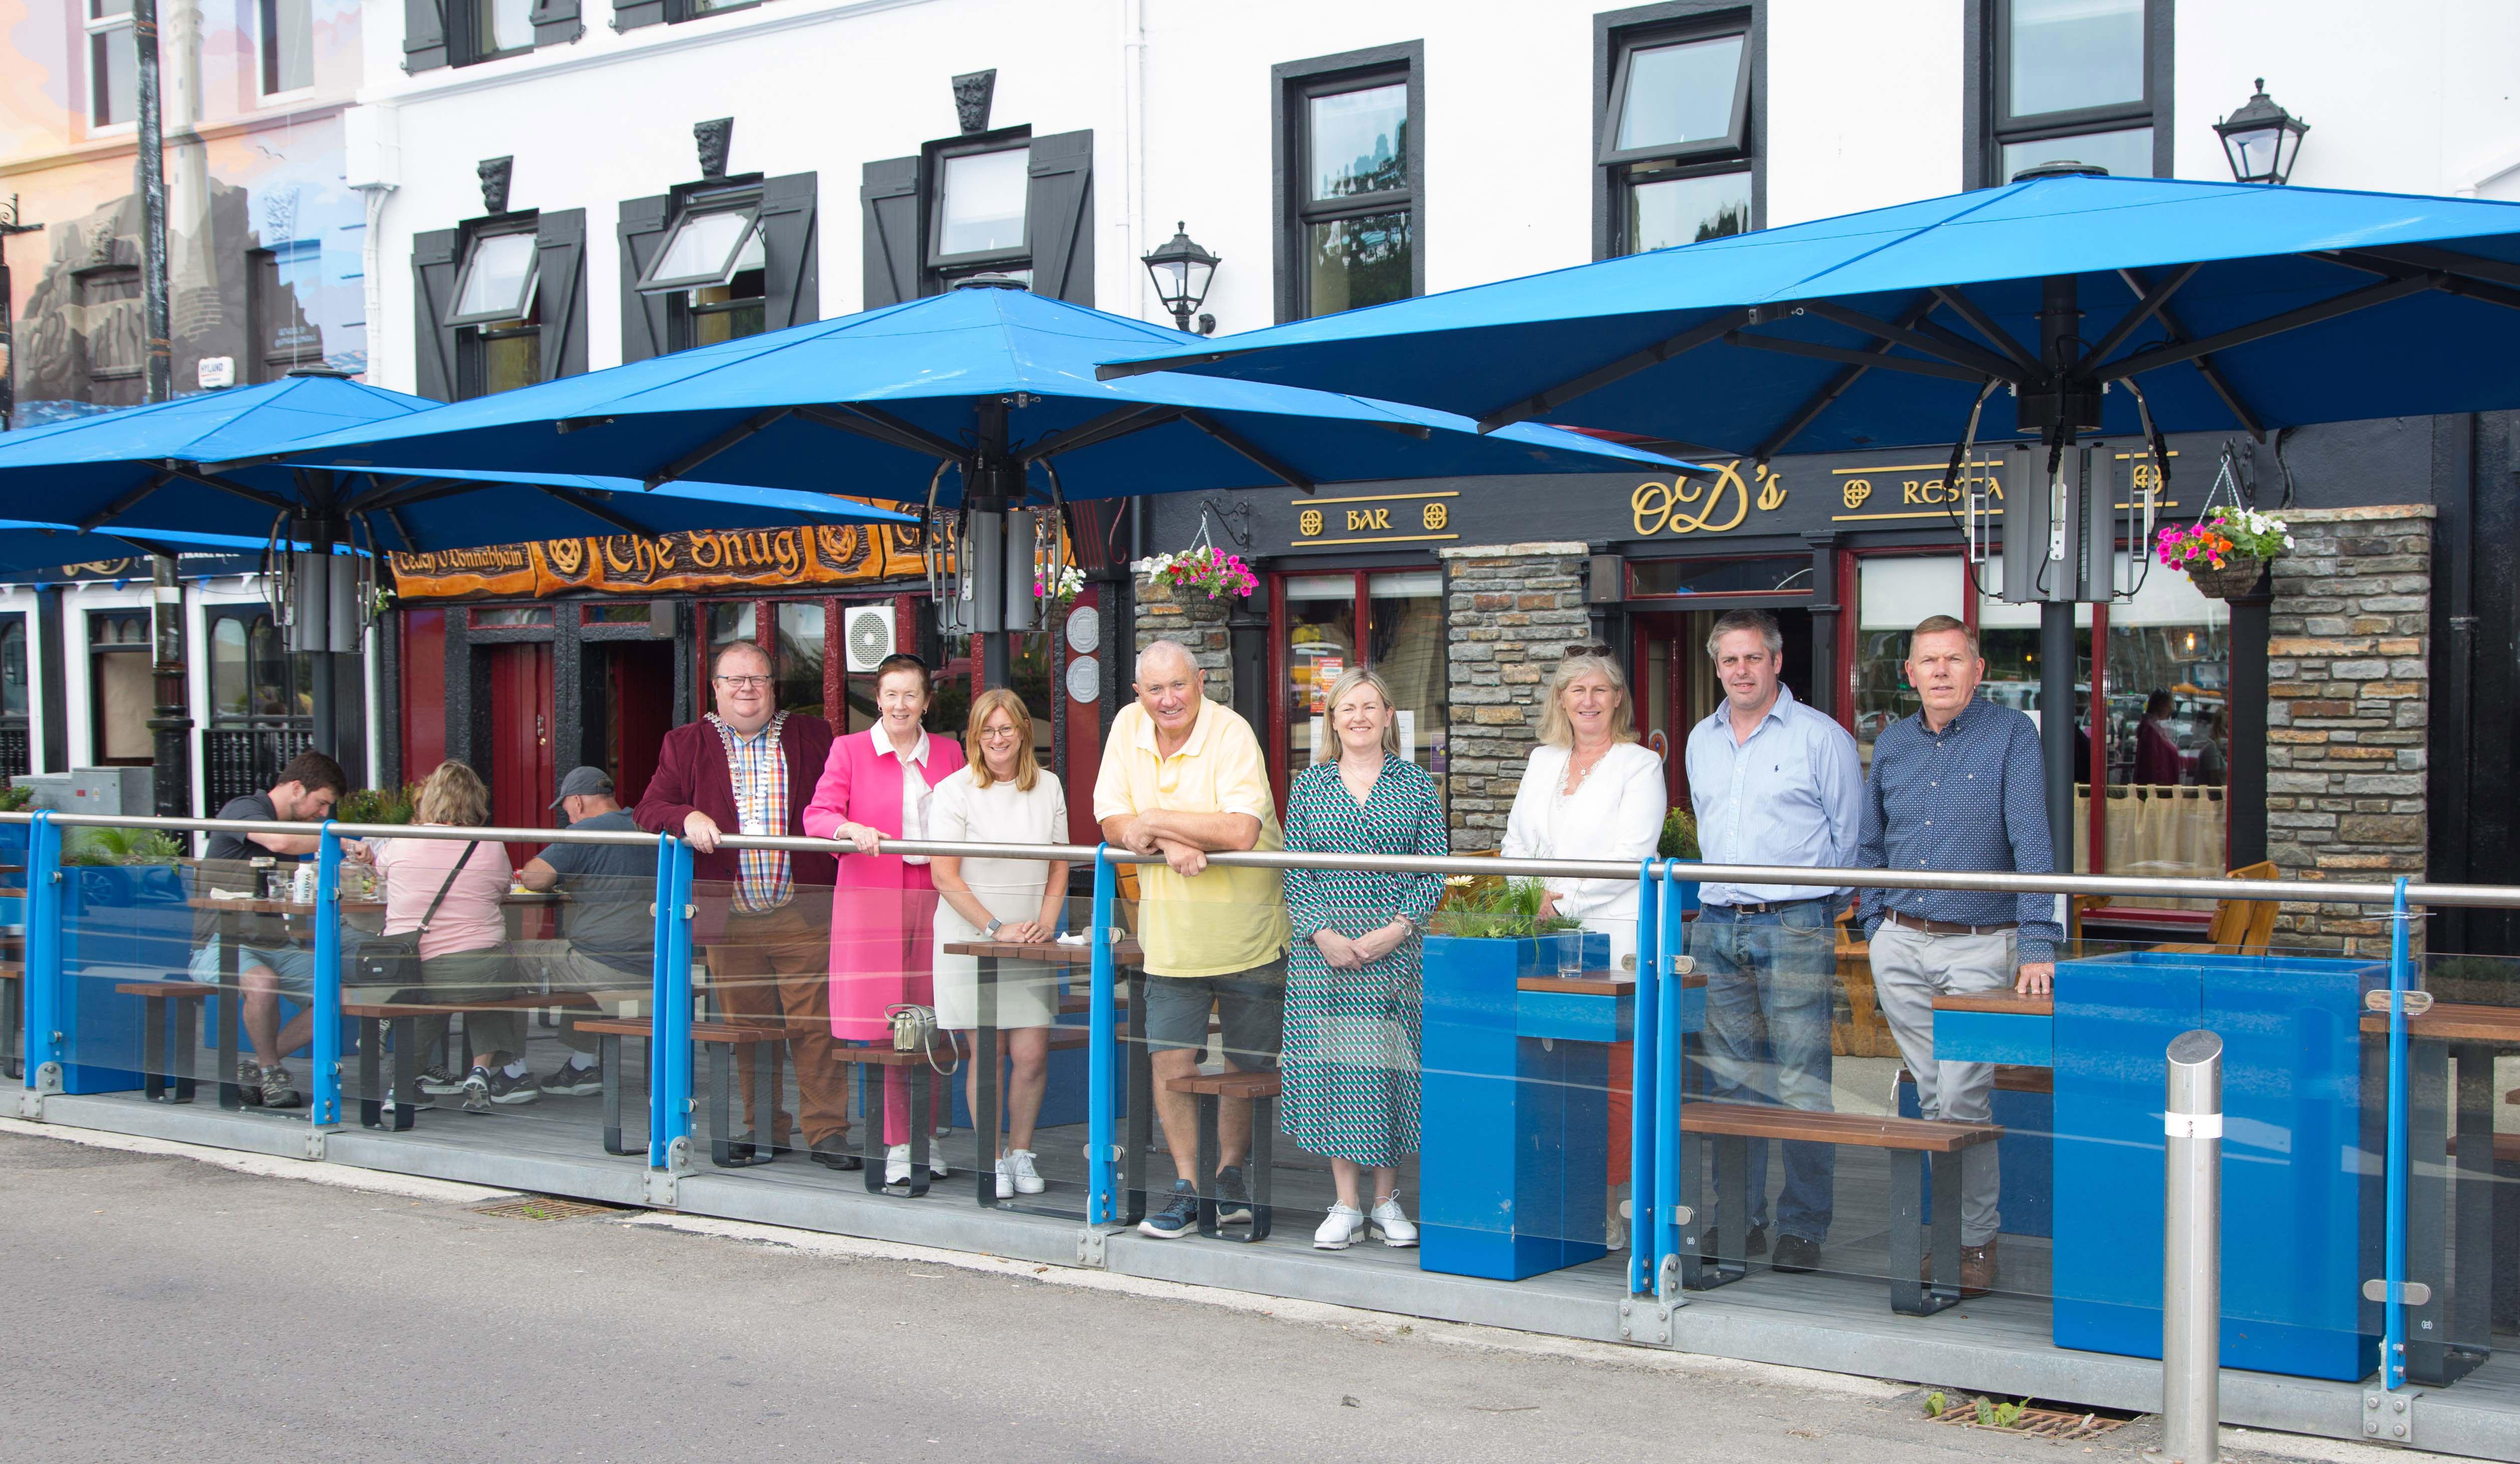 A group of people standing outside a restaurant